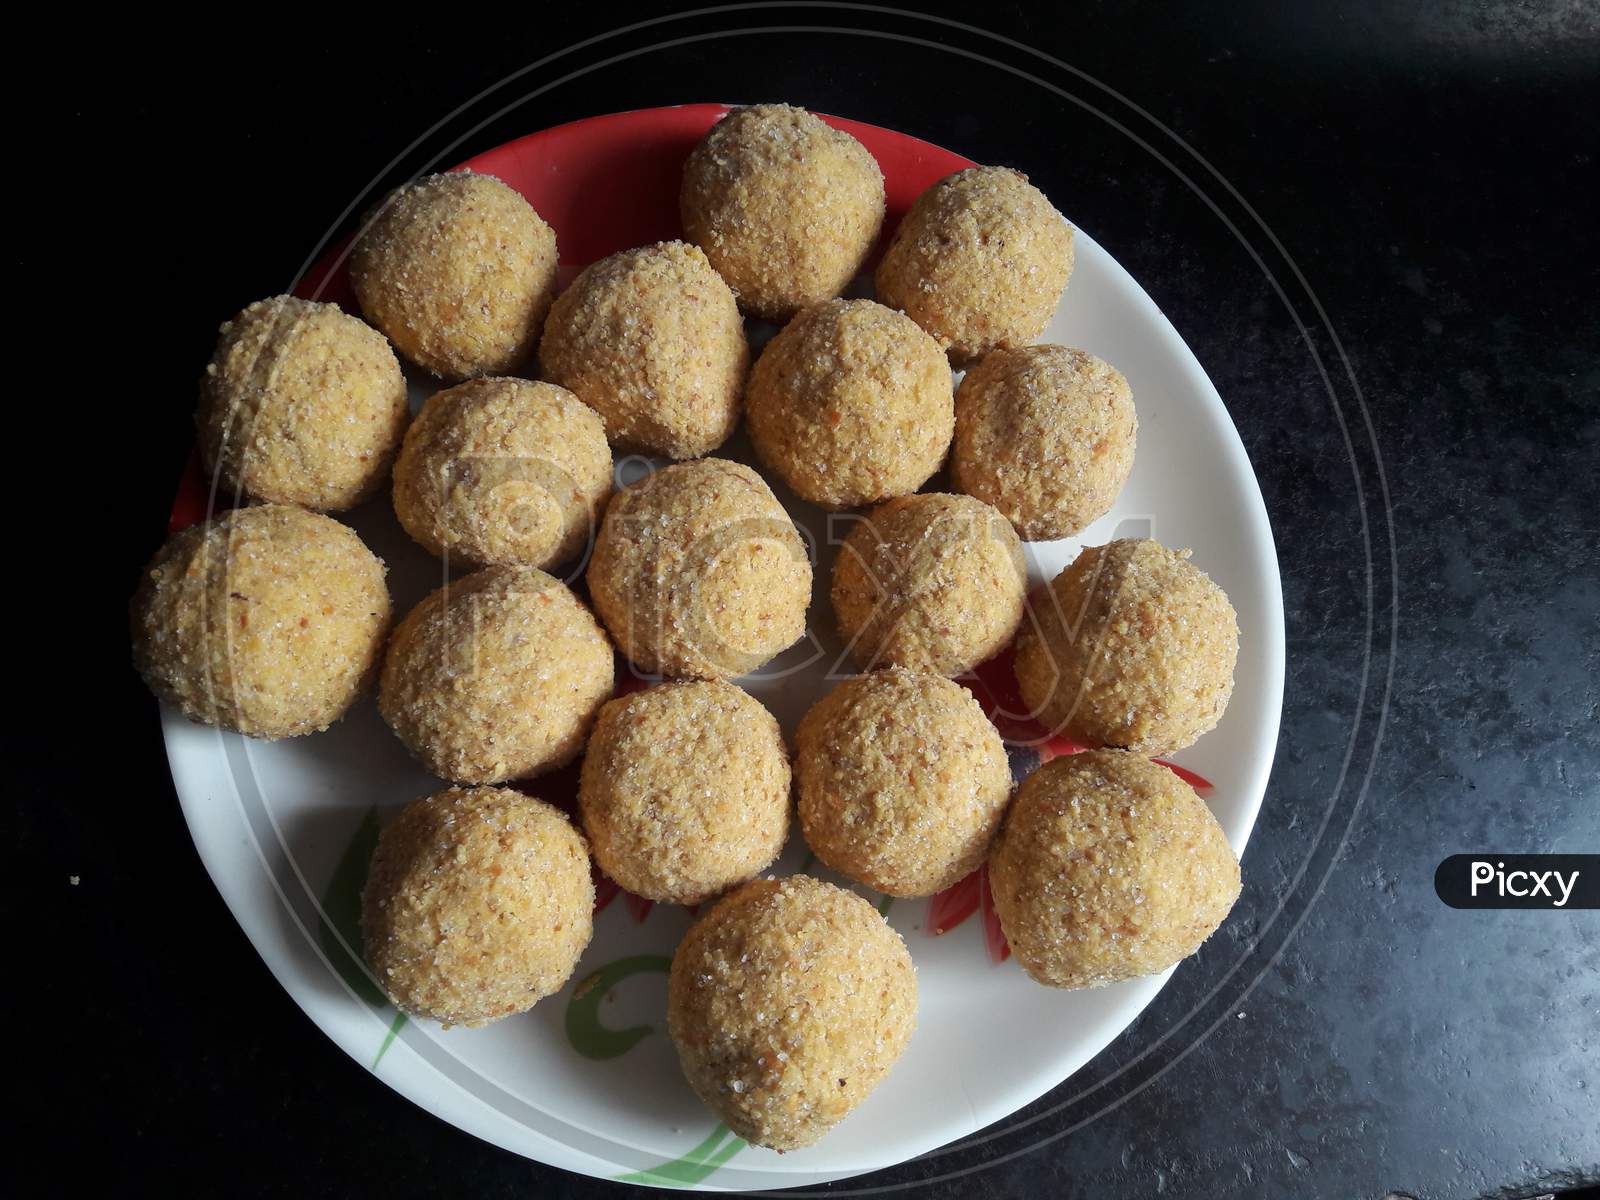 These are laddu